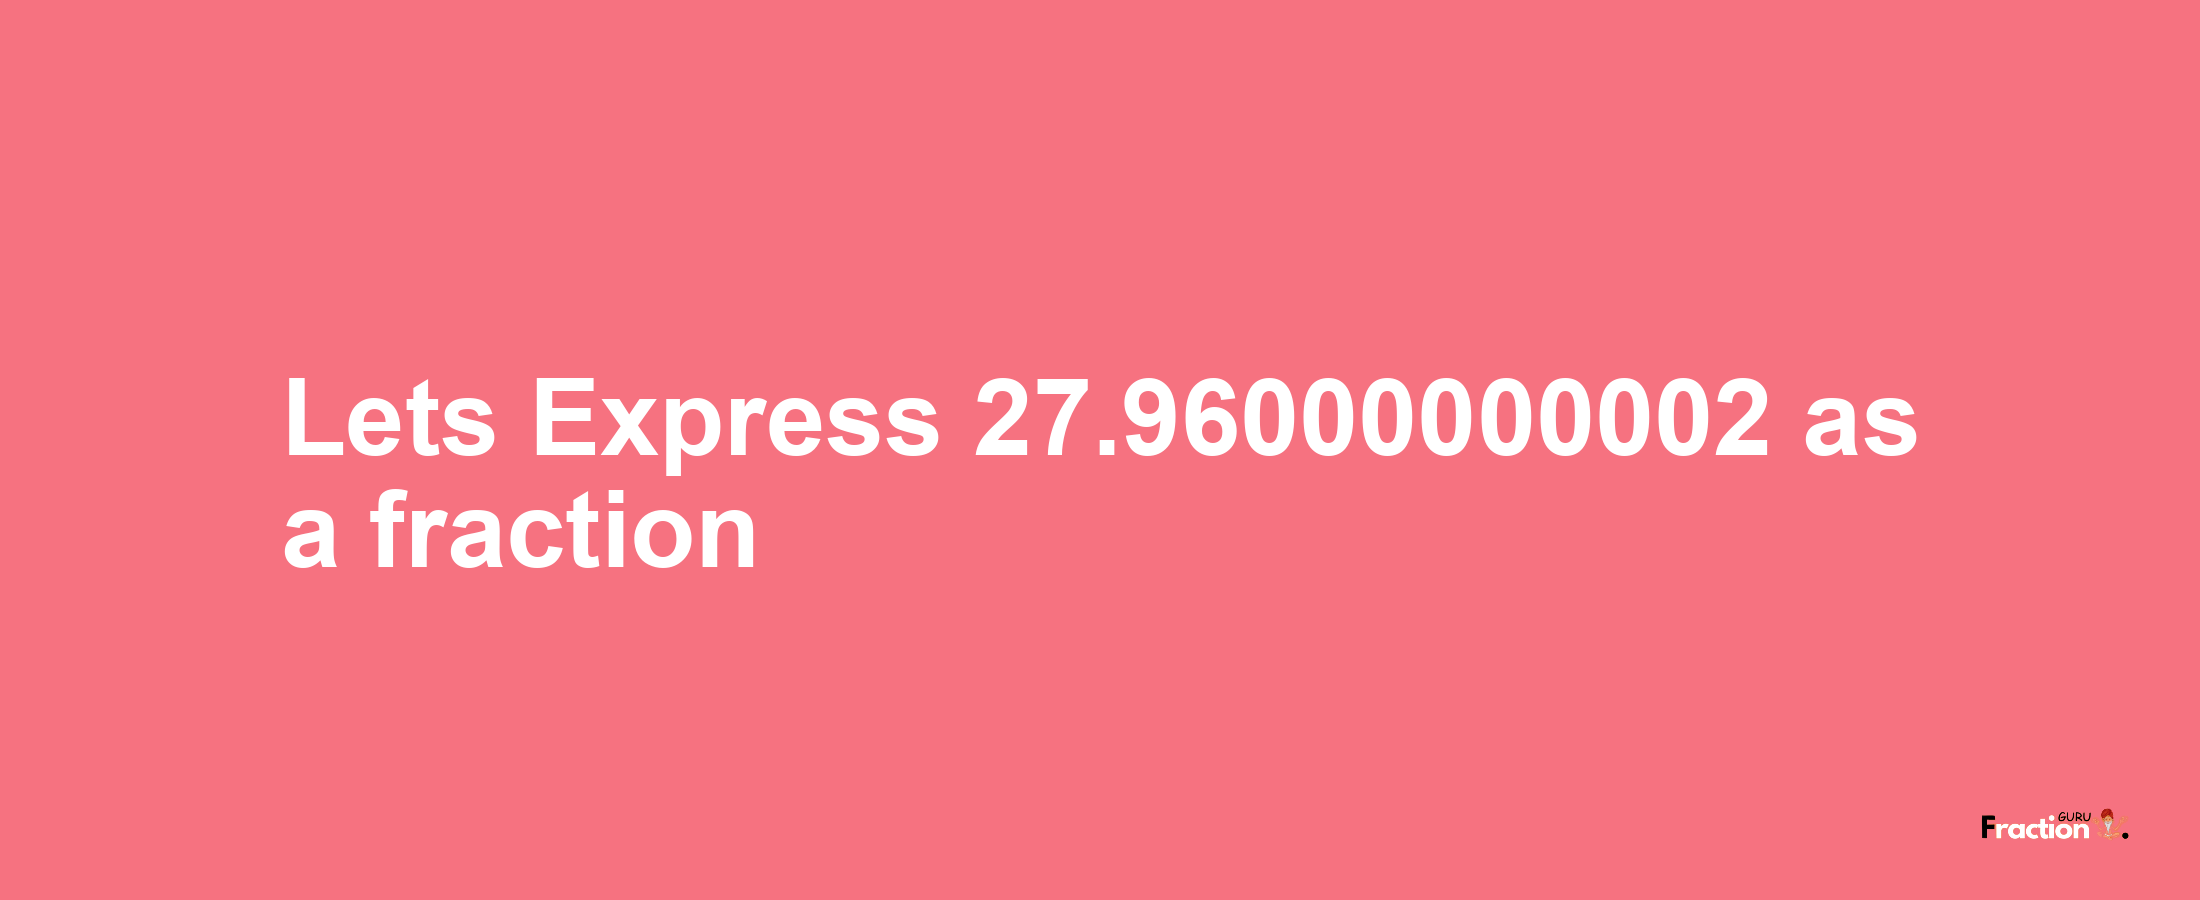 Lets Express 27.96000000002 as afraction